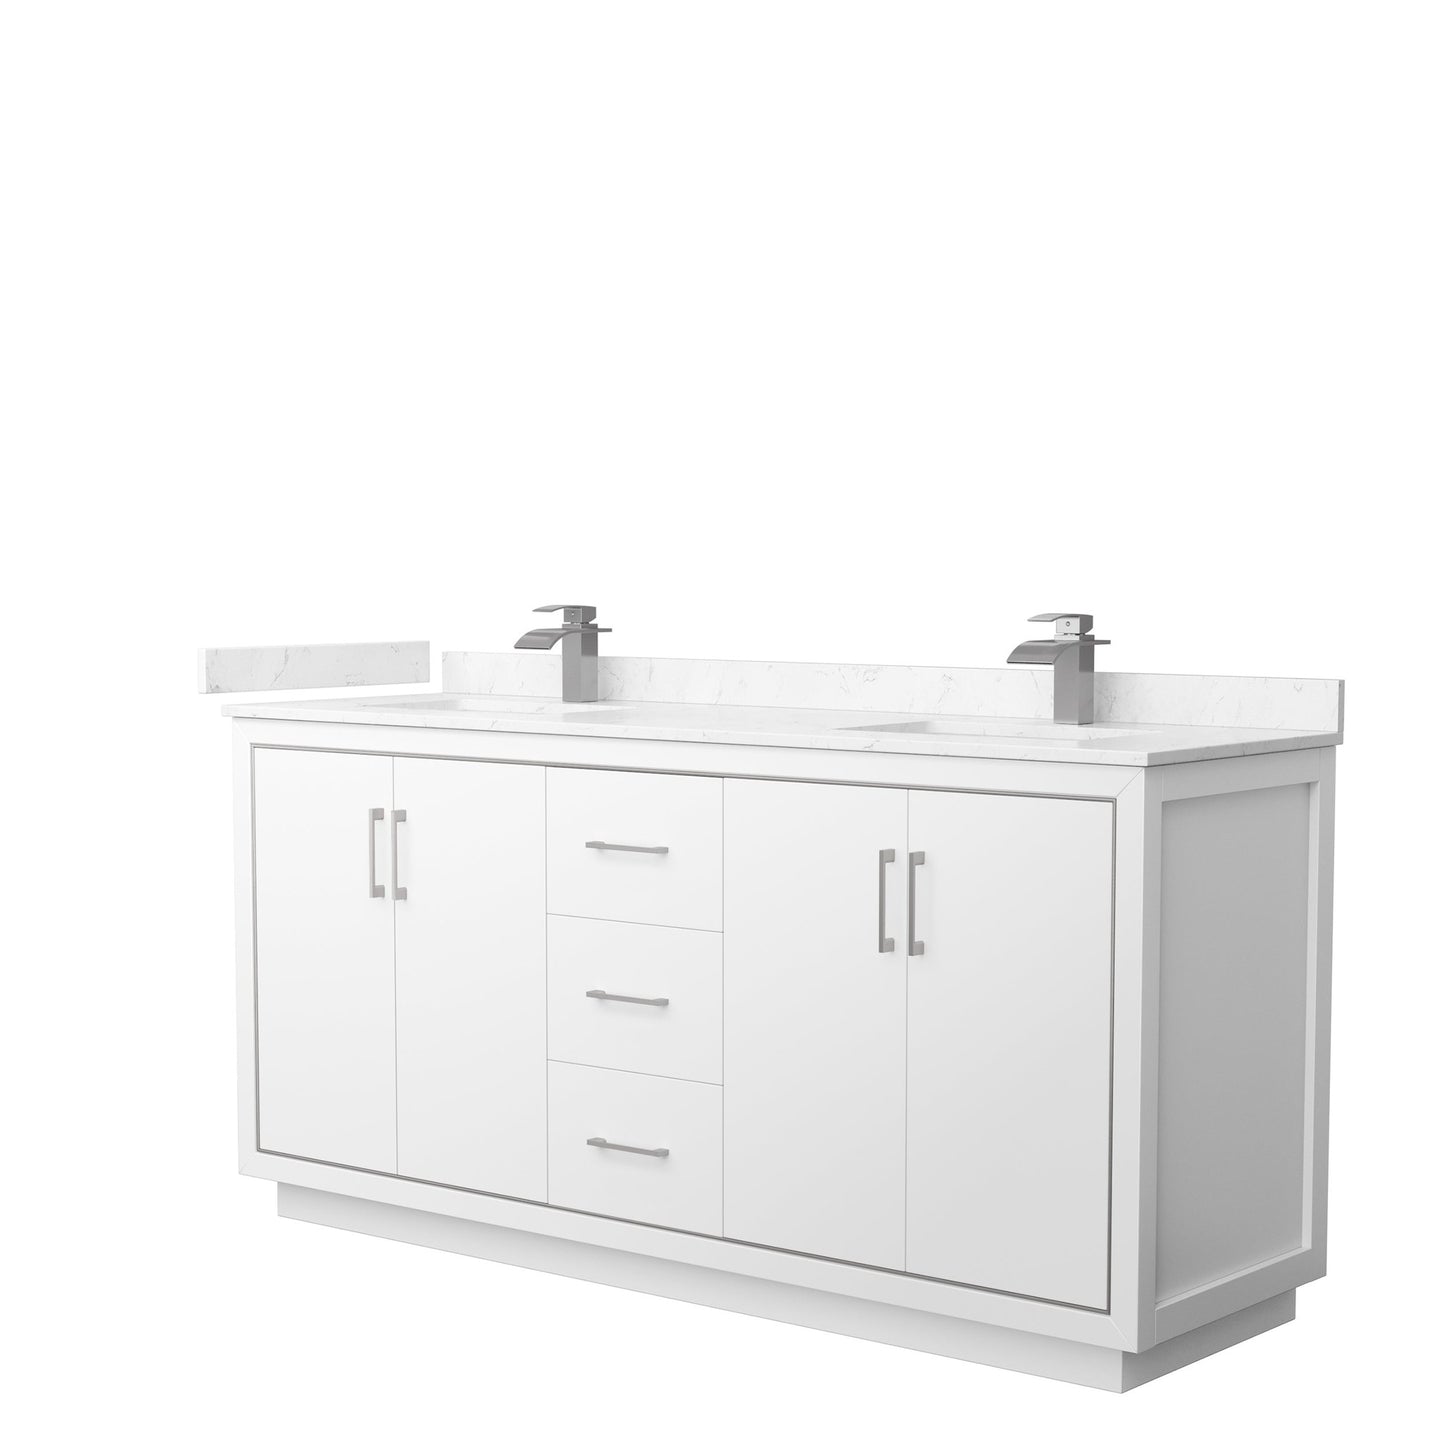 Wyndham Collection Icon 72" Double Bathroom Vanity in White, Carrara Cultured Marble Countertop, Undermount Square Sinks, Brushed Nickel Trim